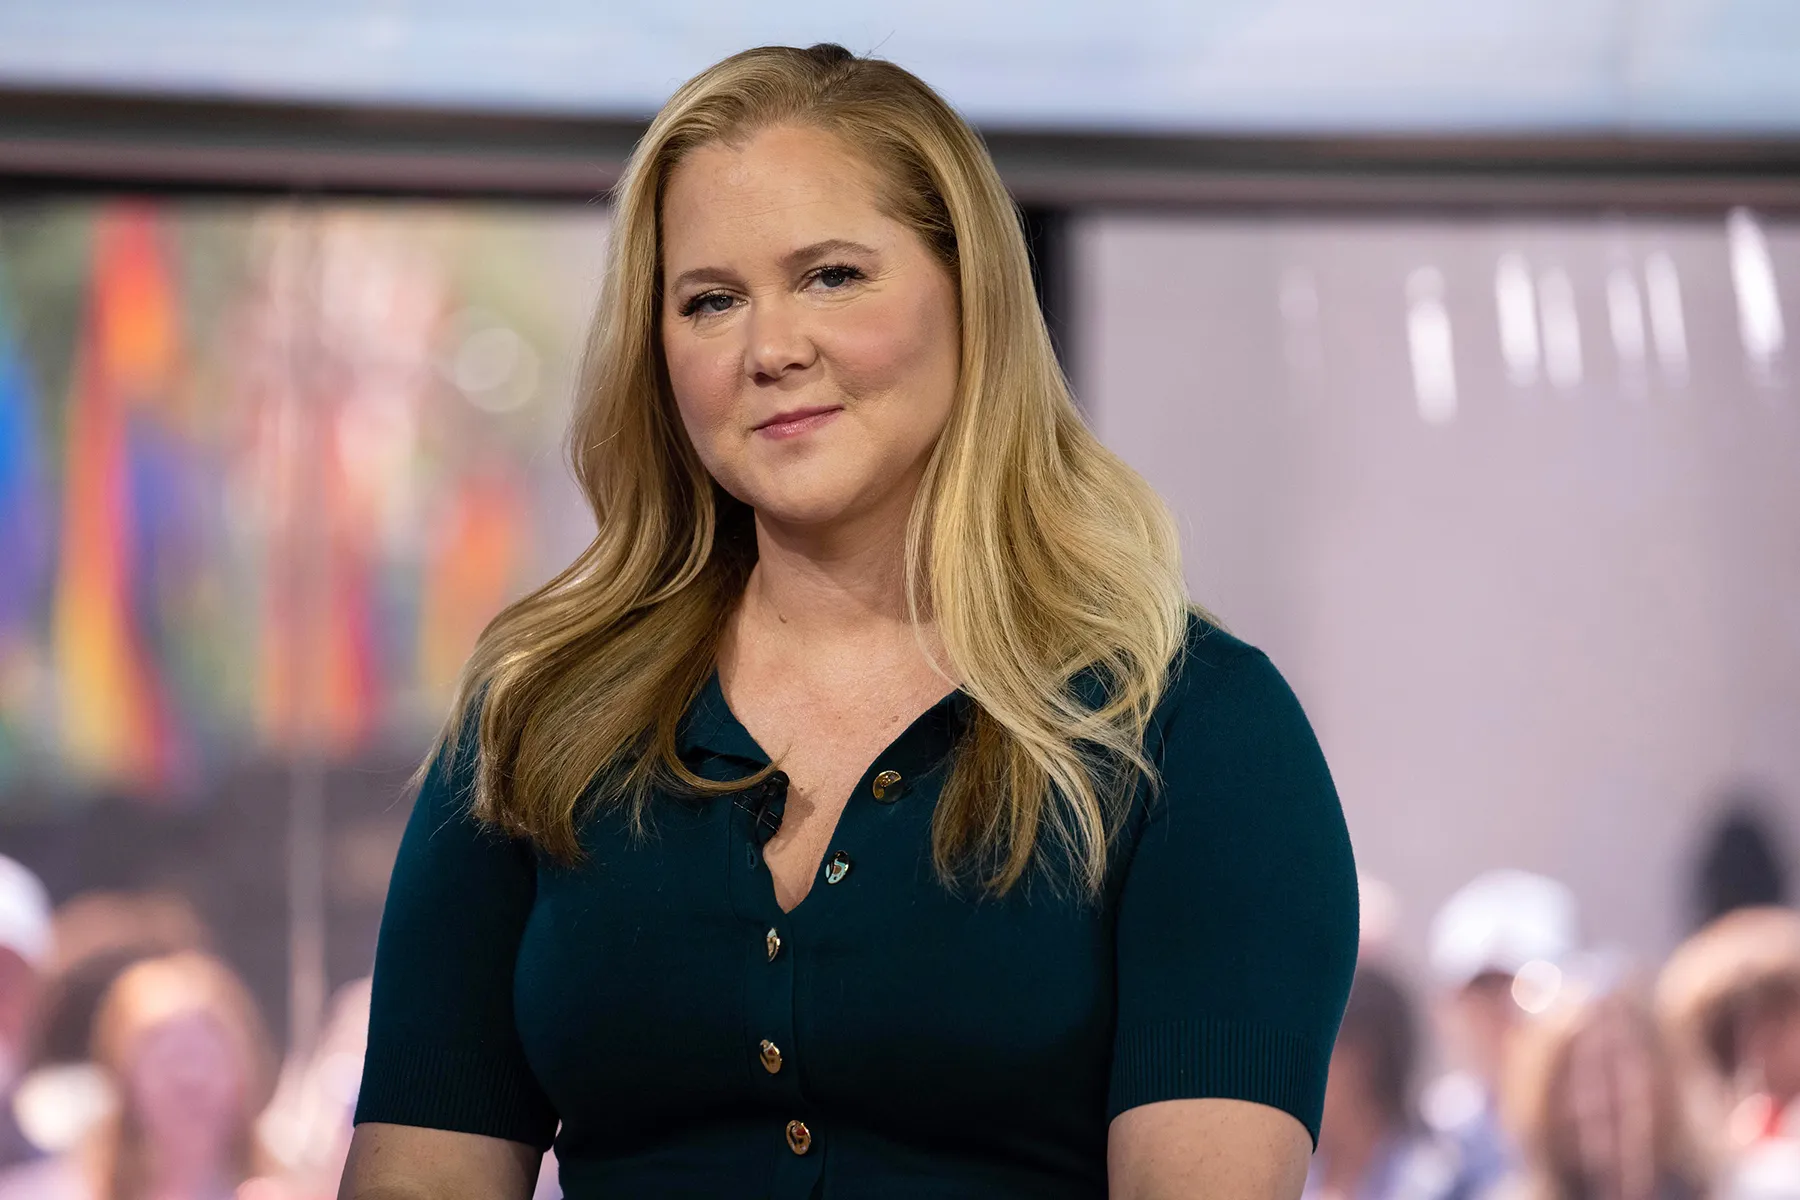 How rich is Amy Schumer?